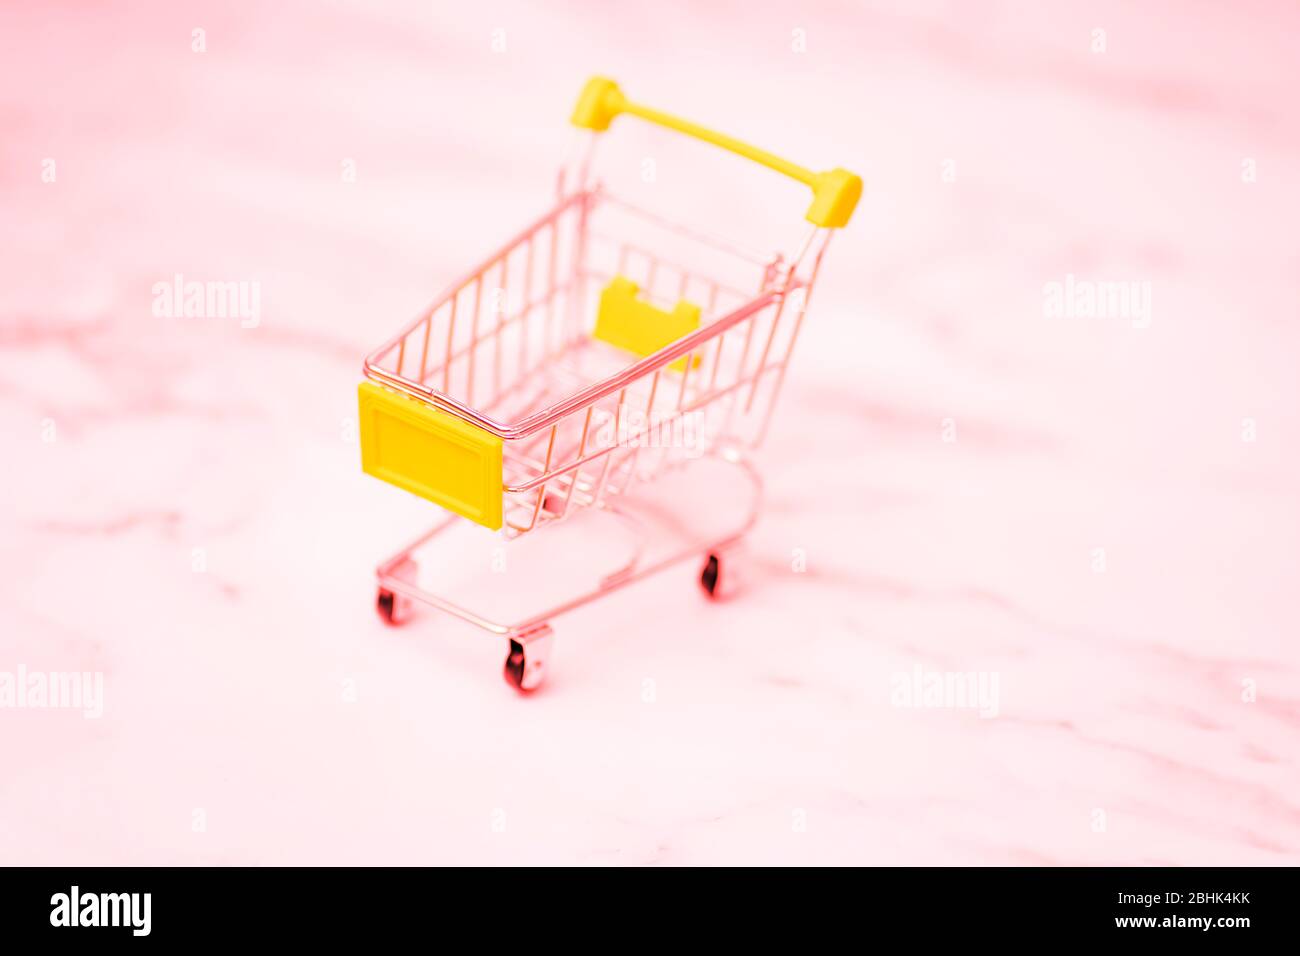 shopping cart. Copy space for text or design. Stainless steel shopping trolley upside down. Minimalist shopping concept. Stock Photo